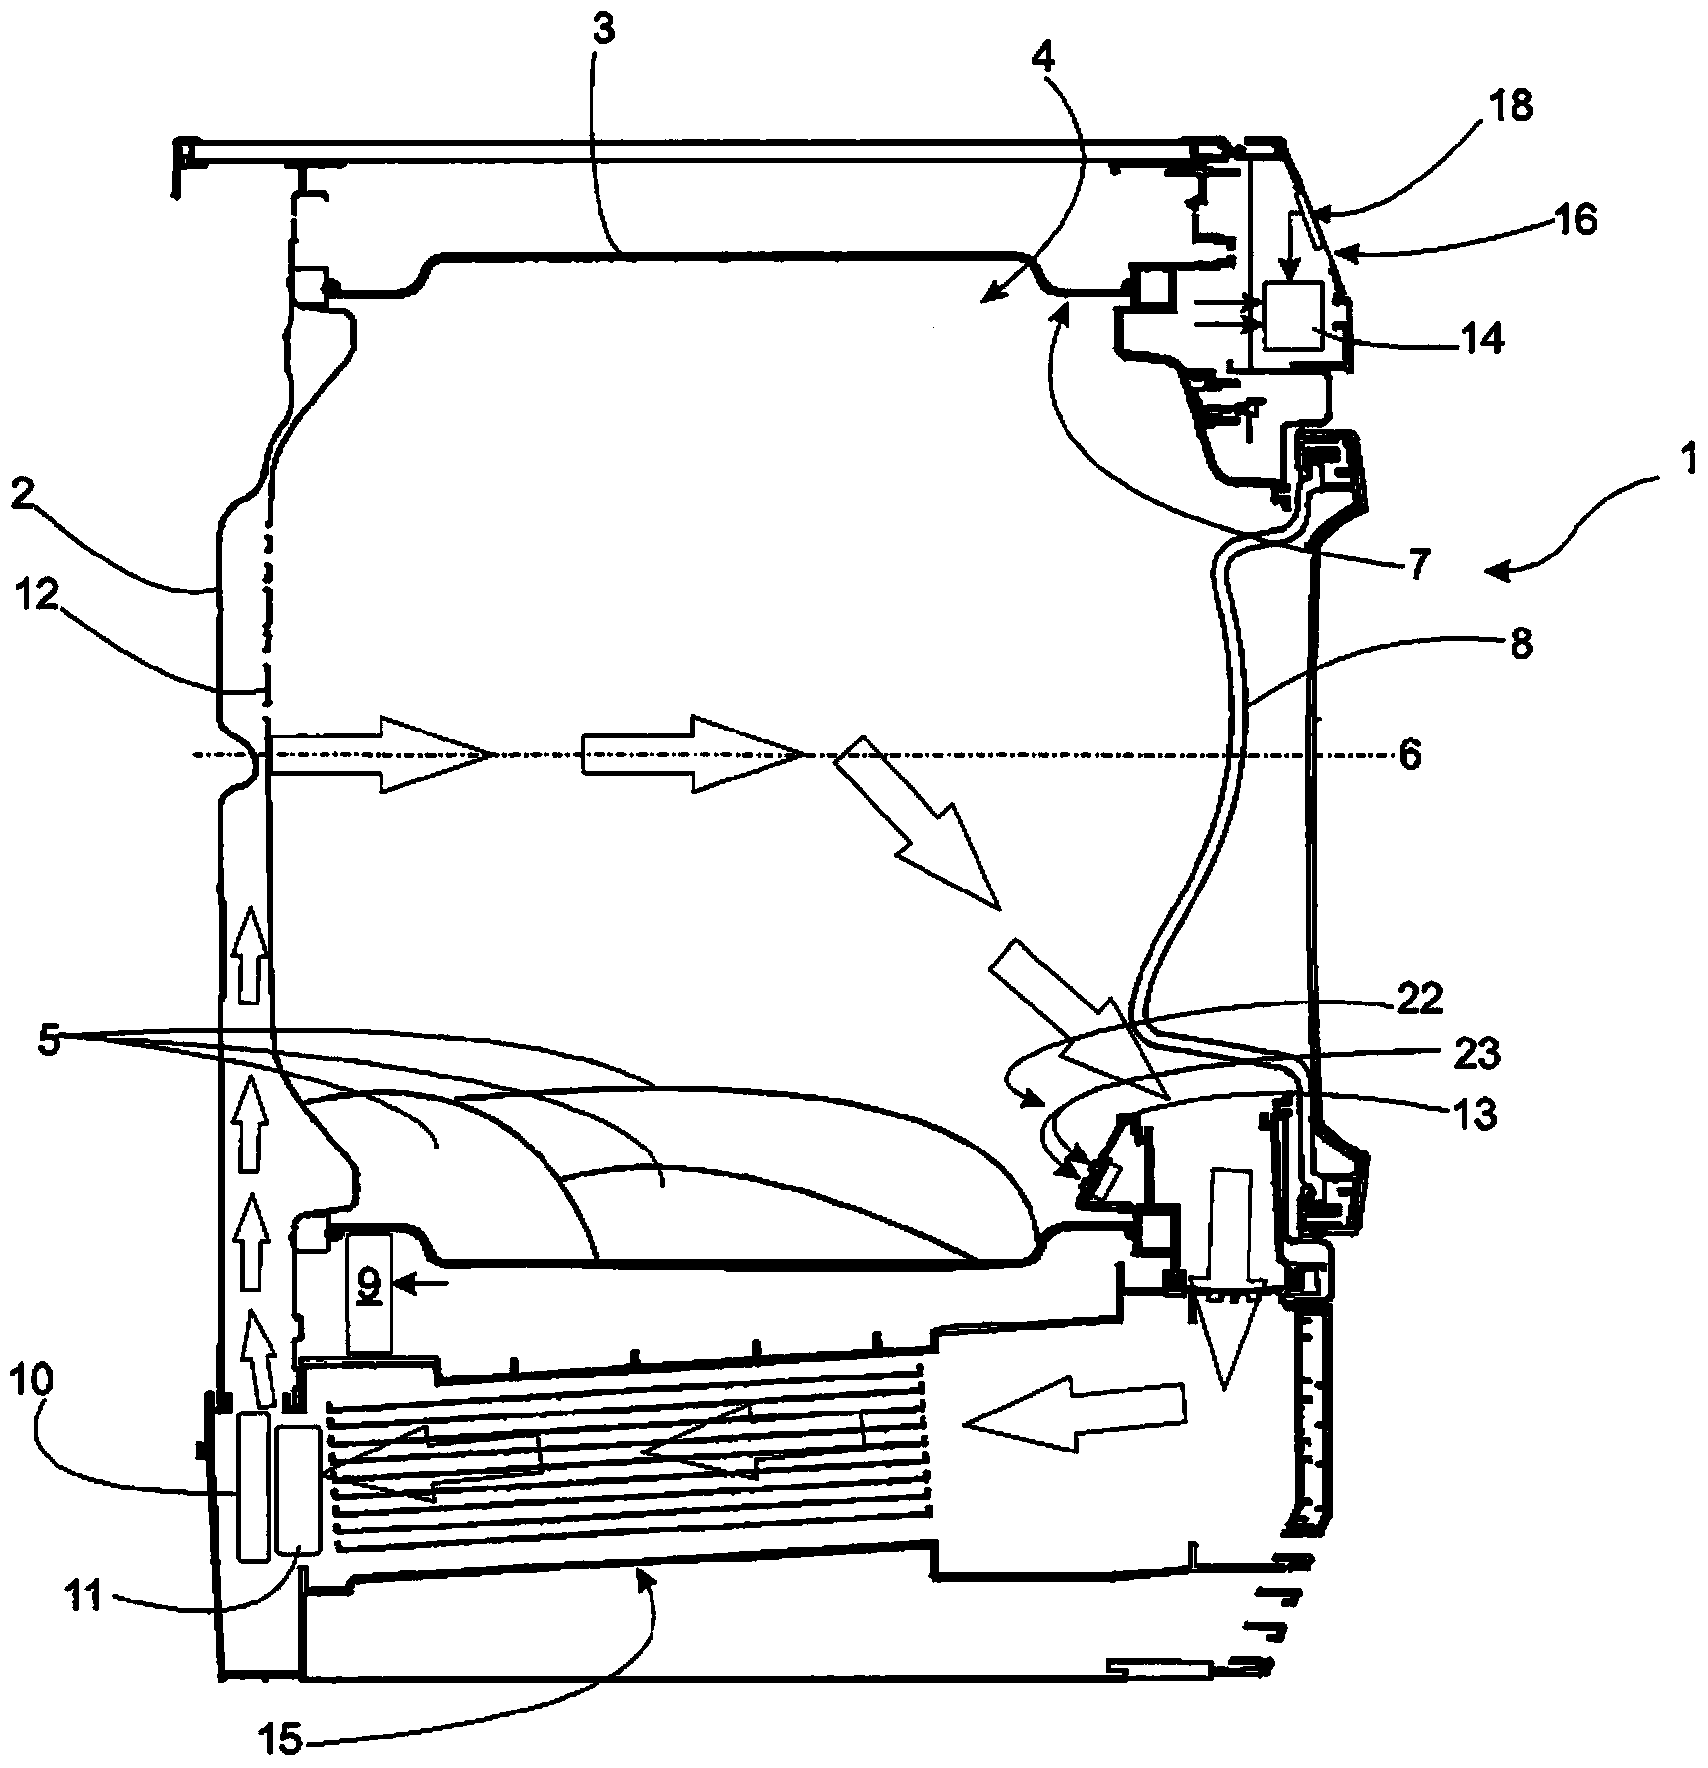 A method of controlling a rotatable-drum laundry dryer and a rotatable-drum laundry dryer implementing the method